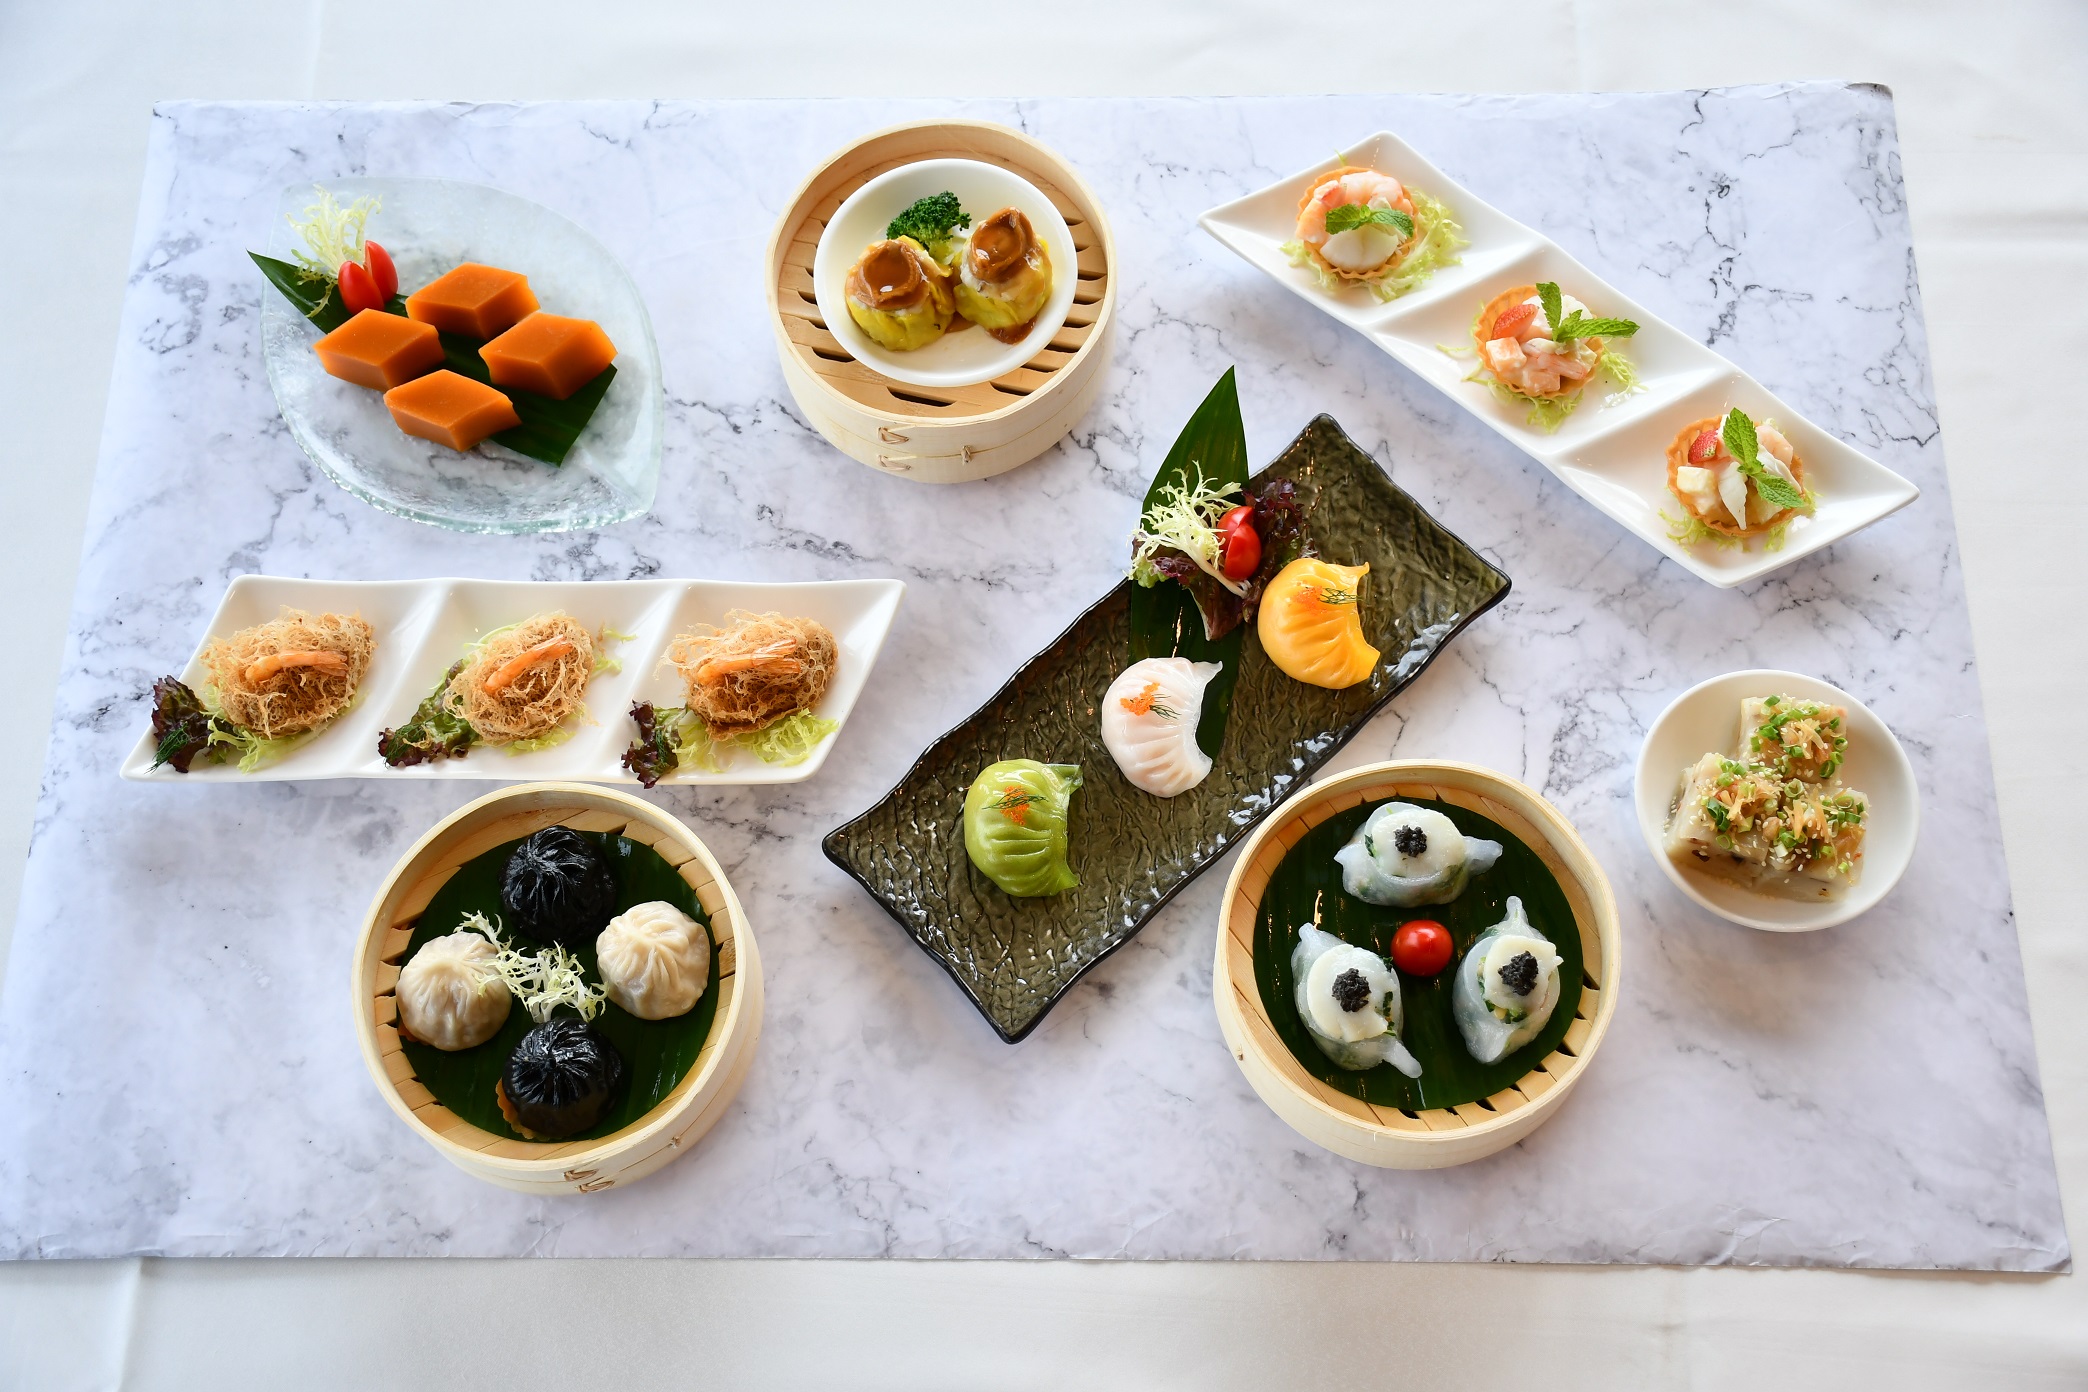 all you can eat dim sum lunch at grand coloane resort august 2020 dining